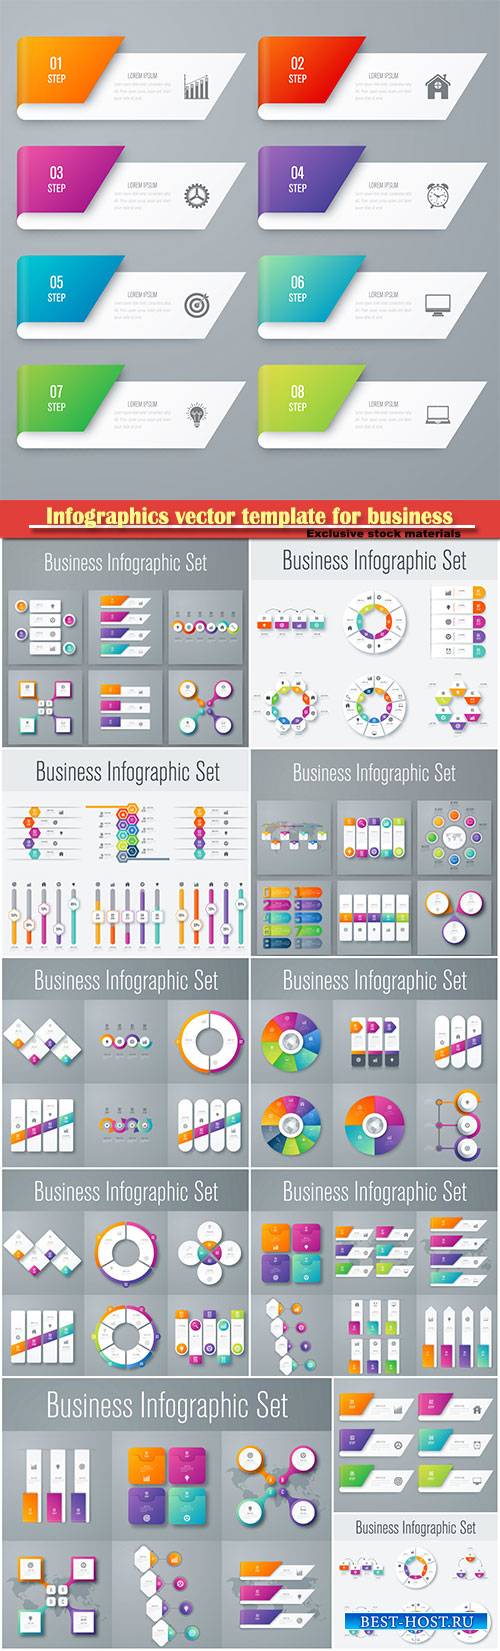 Infographics vector template for business presentations or information banner # 64